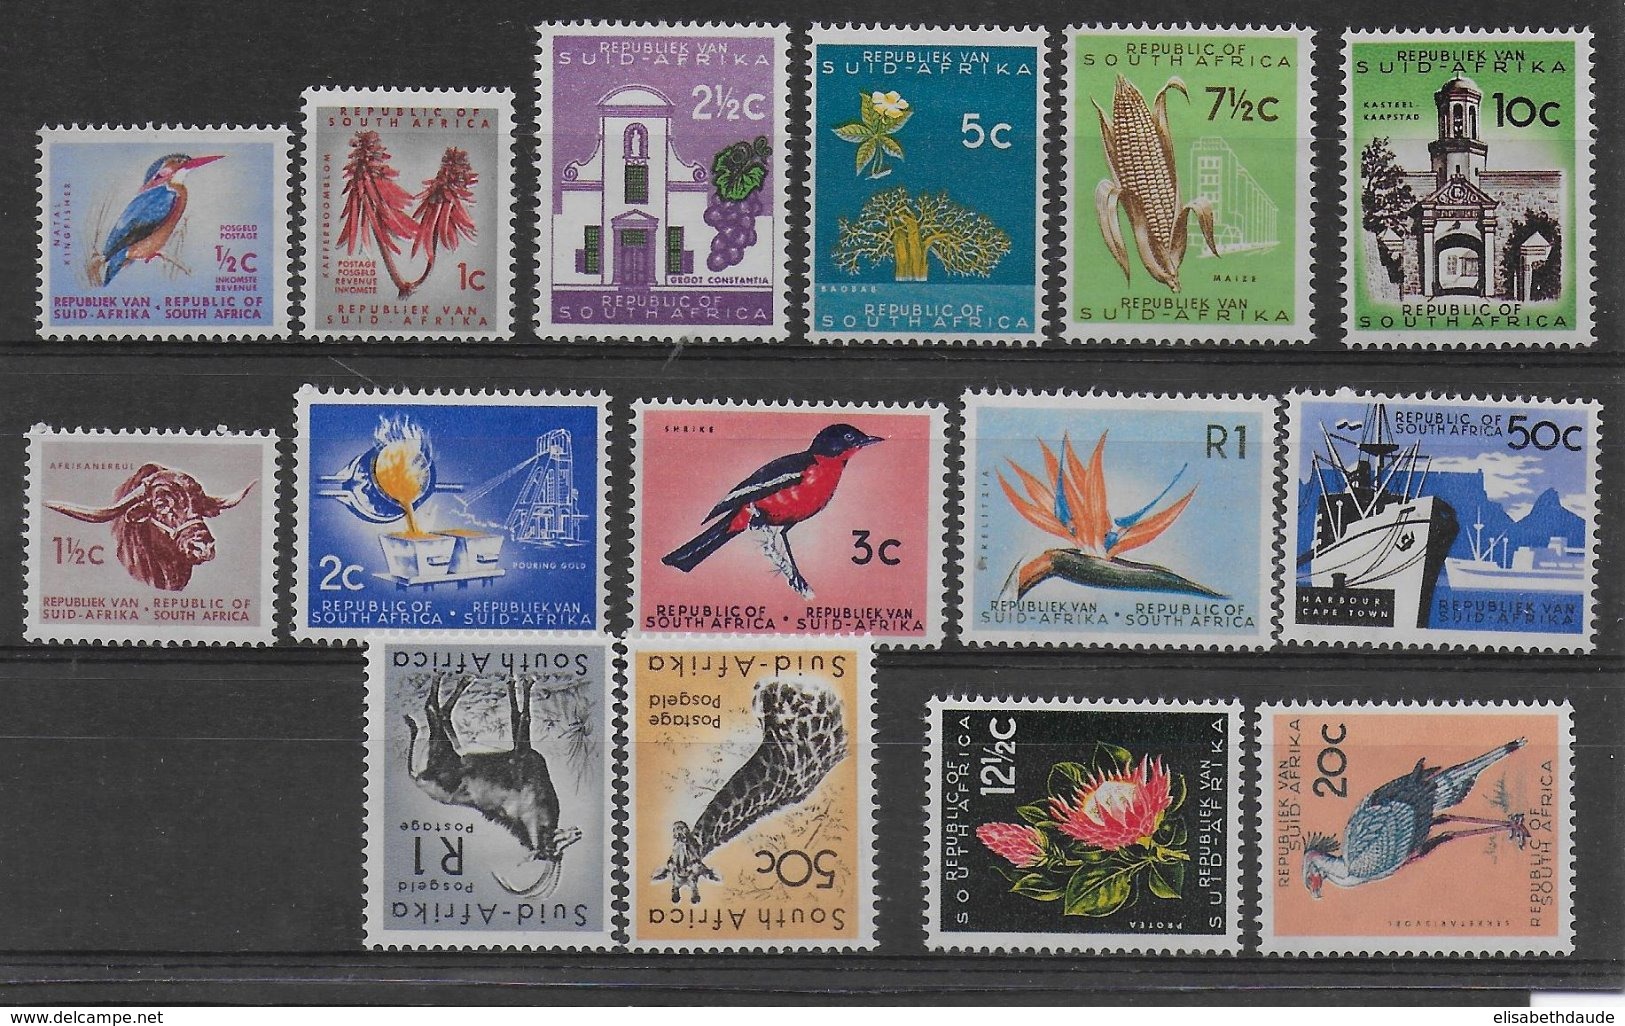 SOUTH AFRICA - YVERT N° 242/243 * MLH + 248/260 ** MNH  - COTE = 130 EUR. - ANIMAUX / FLEURS - Nuovi